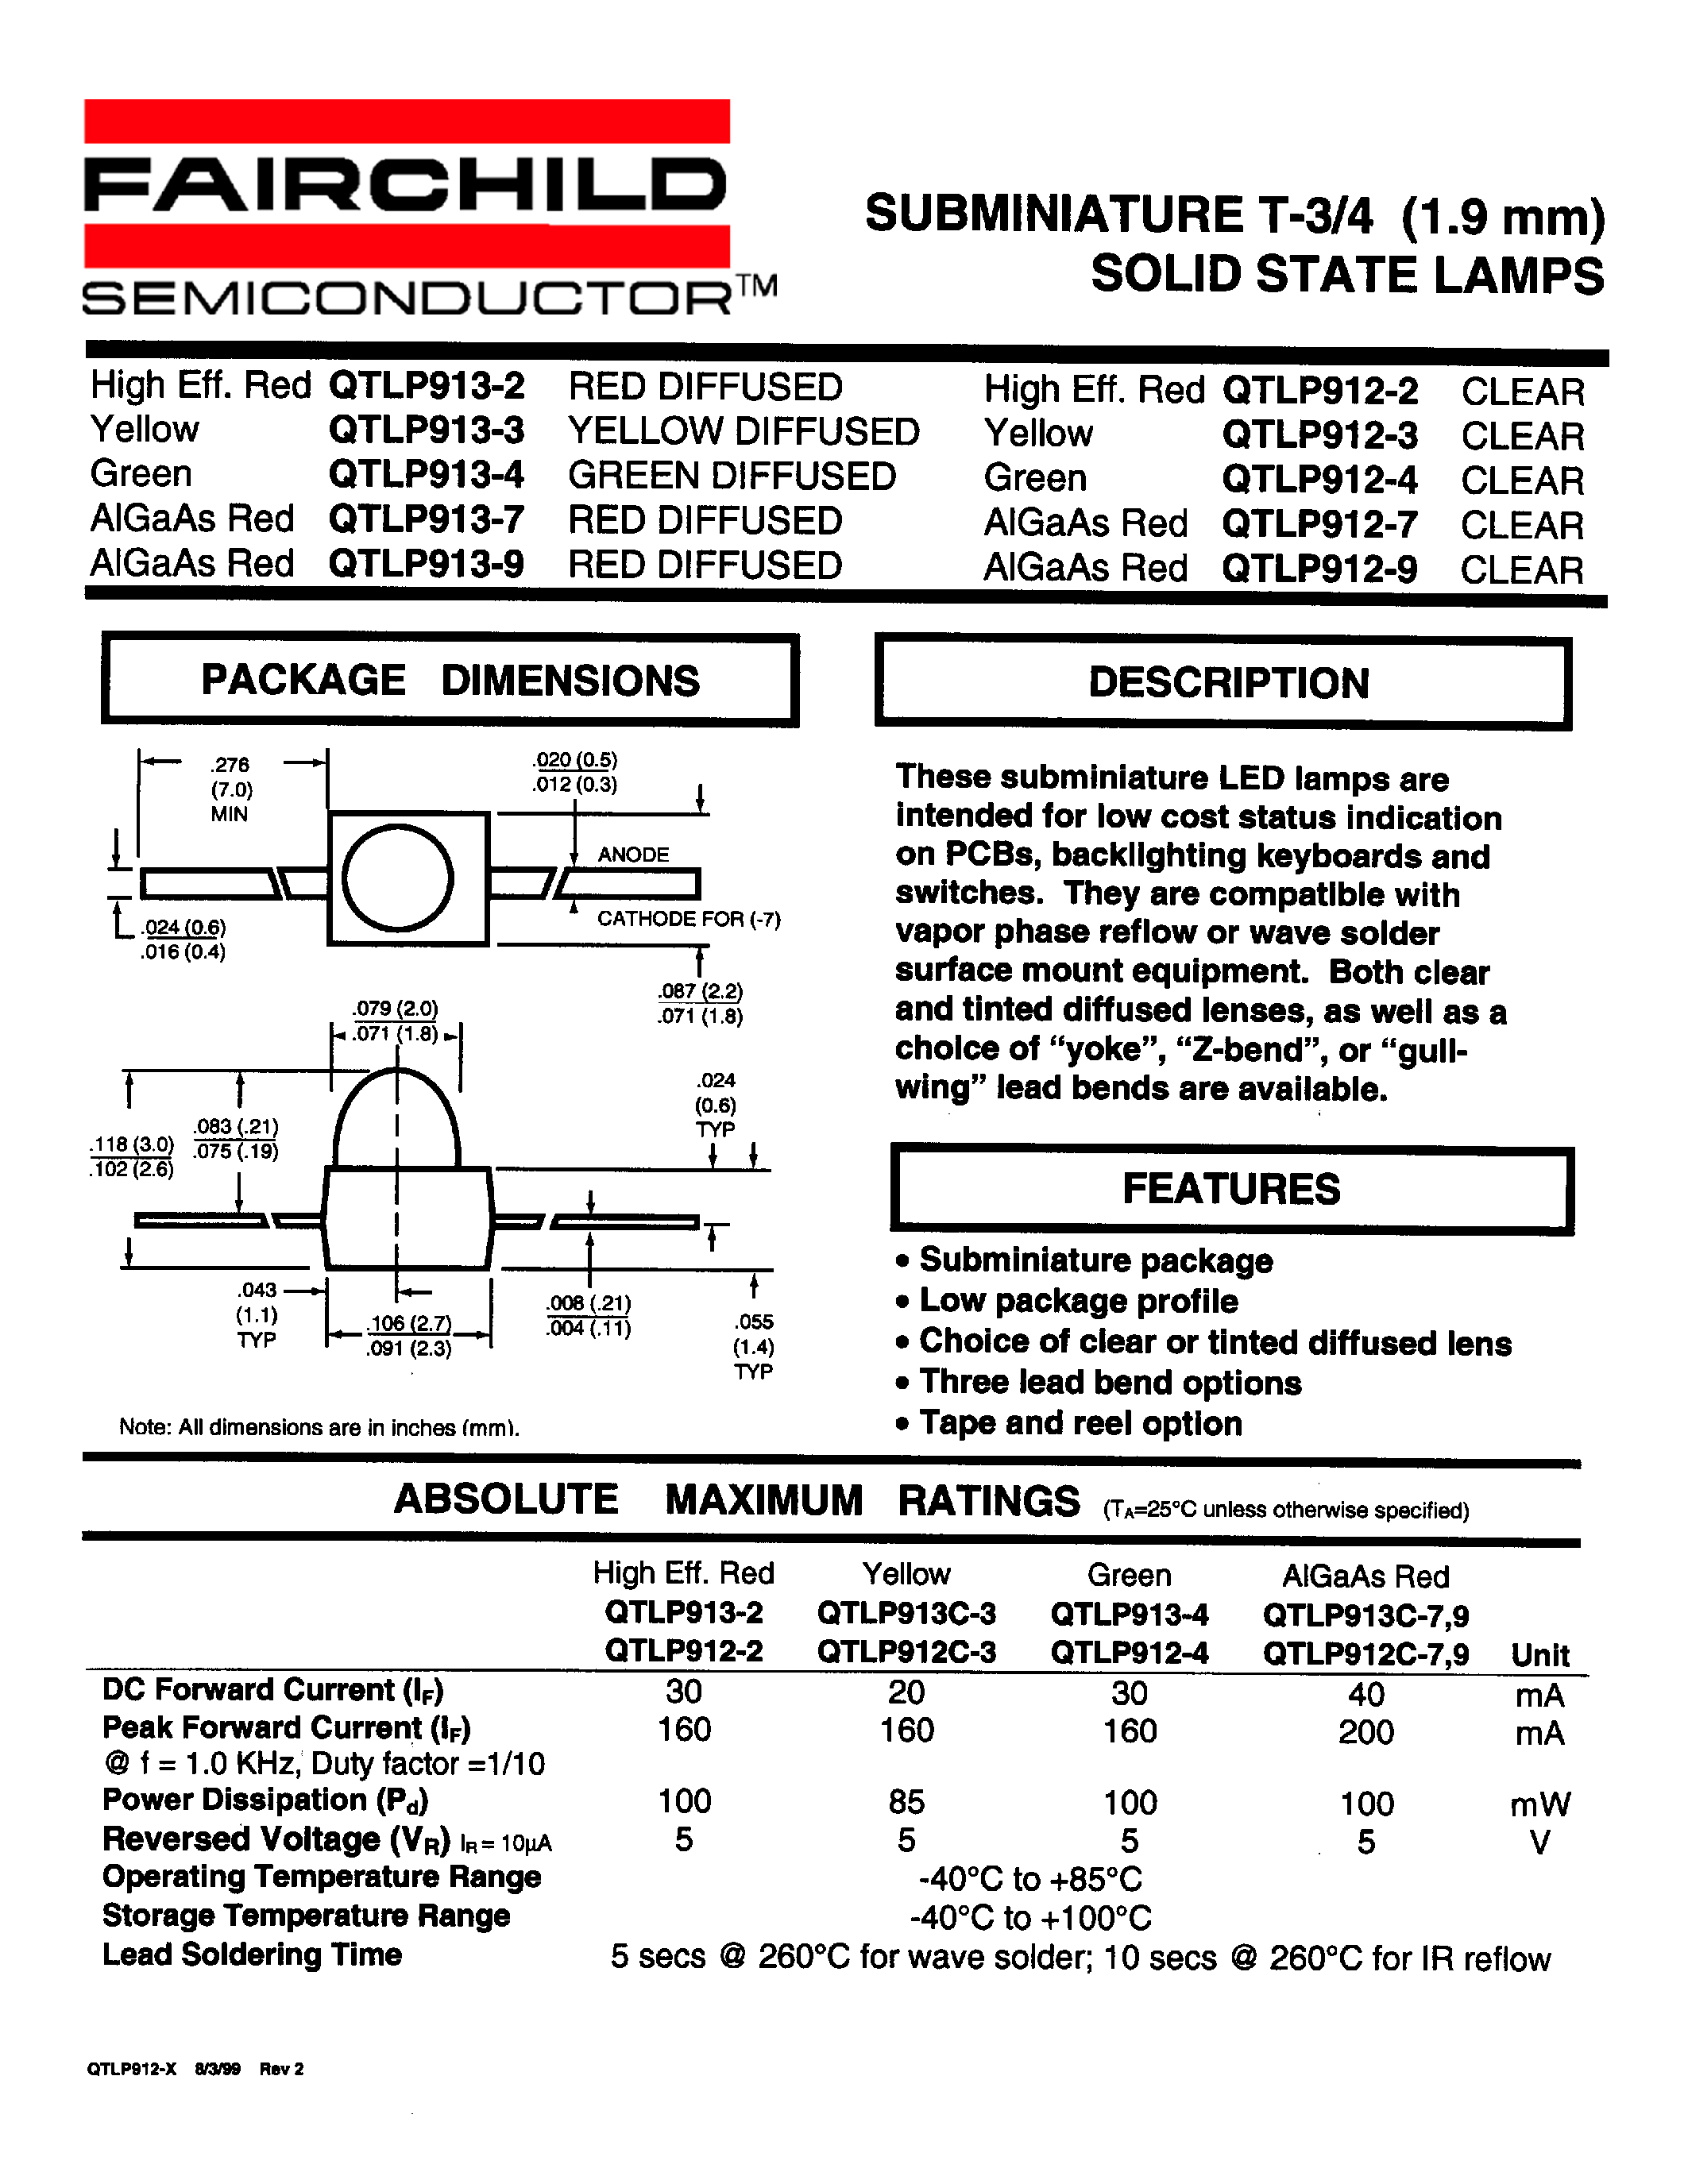 Даташит QTLP912-4 - SUBMINIATURE T-3/4 (1.9 mm) SOLID STATE LAMPS страница 1